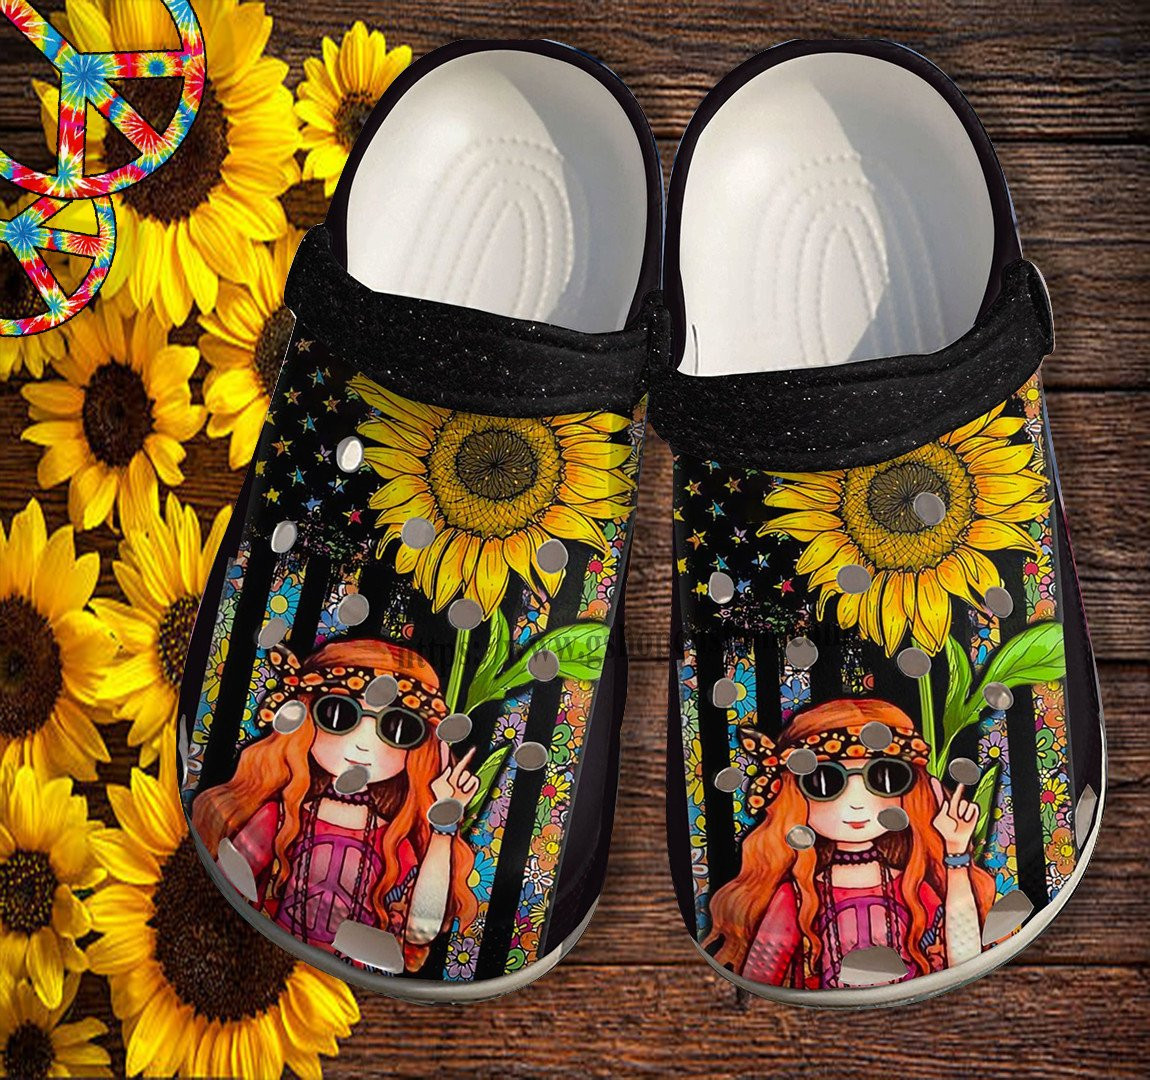 Hippie Daughter Gifts Sunflower Hippie Girl Croc Shoes Customize - America Flag Hippie Sunflower Shoes Croc Clogs